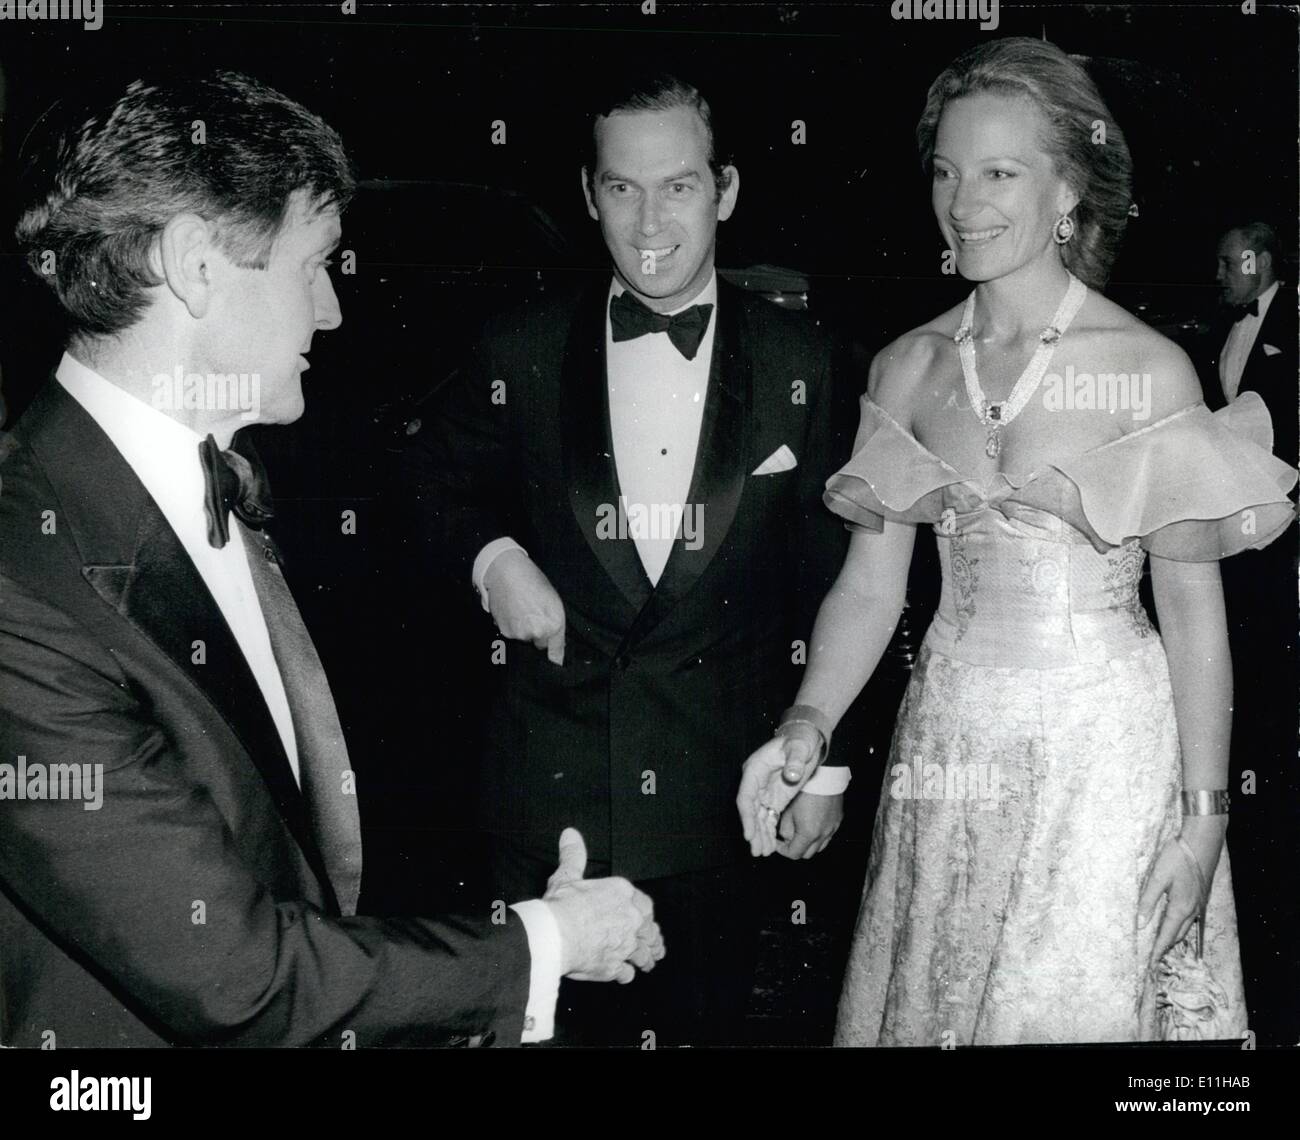 Jun. 06, 1978 - Princes Michael Of Kent And His Fiancee Attend The Red Cross Ball. Photo Shows Princess Michael of Kent seen arriving at the Red Cross Hall recently with his new fiance Marie-Christine Von Reibnitz. Stock Photo